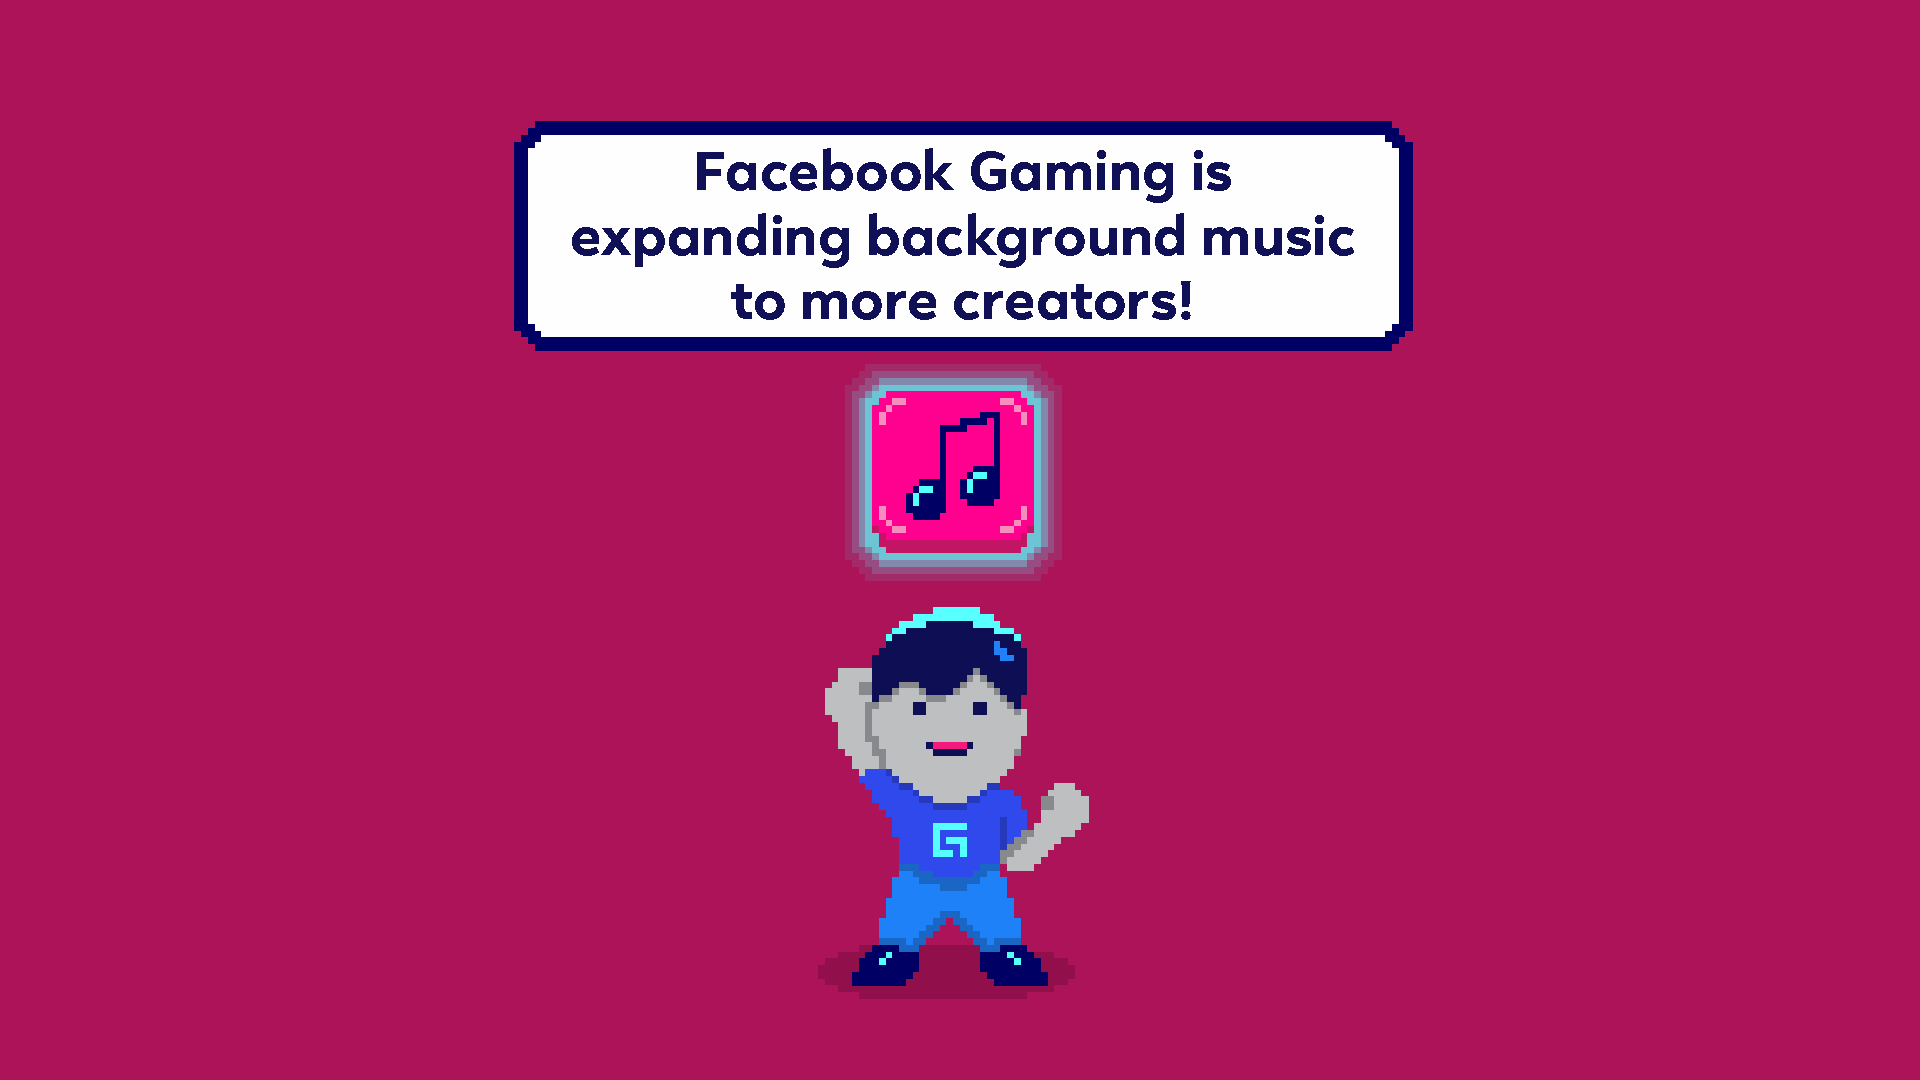 GIF of Facebook Gaming expanding background music to creators